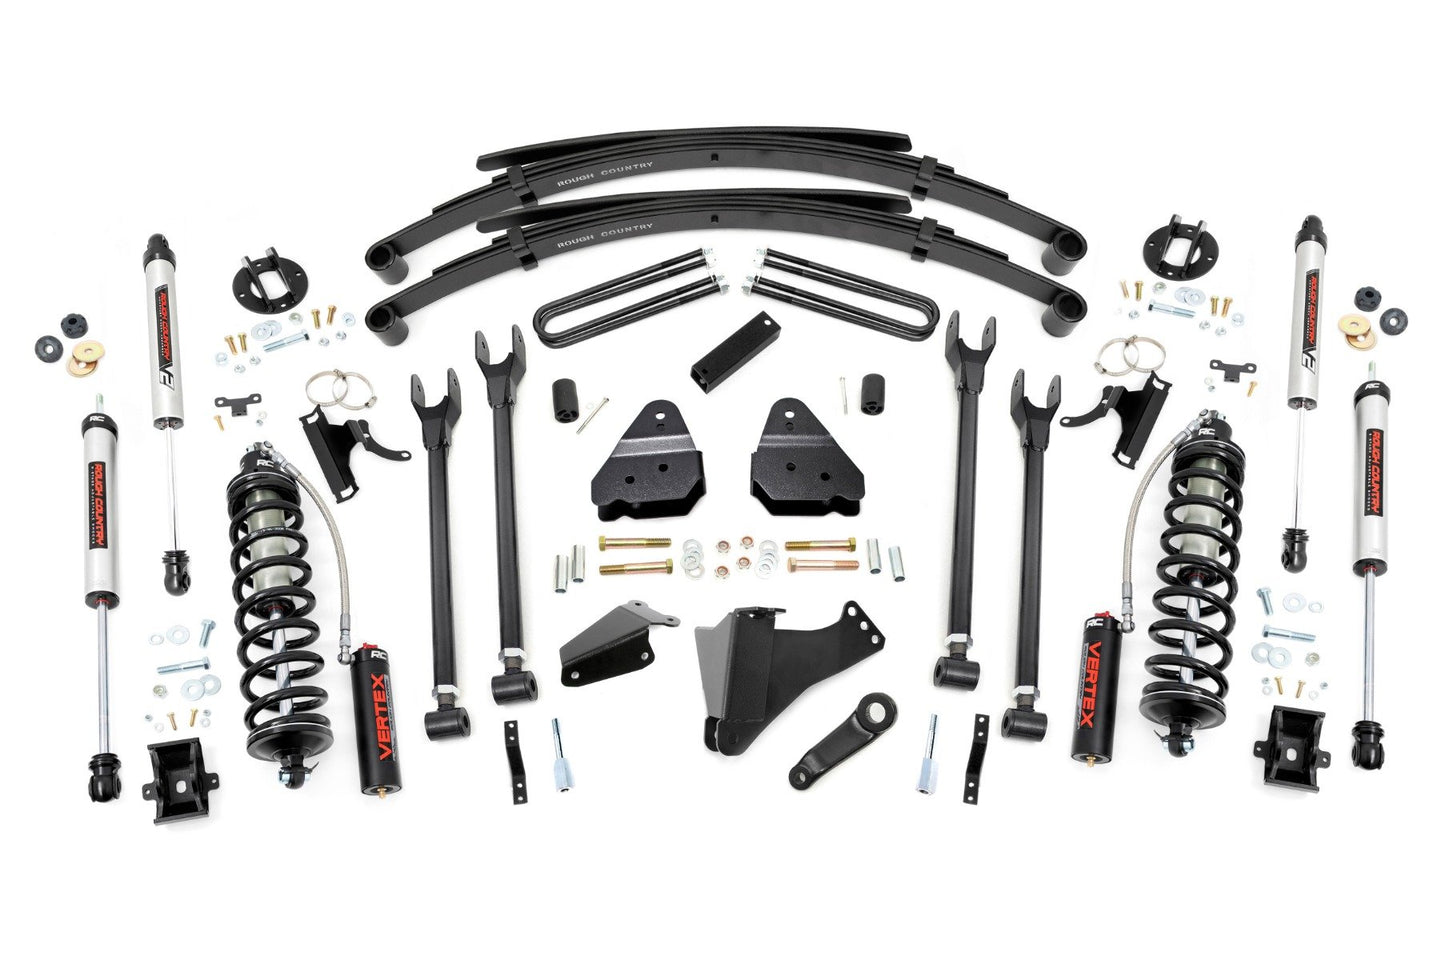 Rough Country (58258) 6 Inch Lift Kit | Diesel | 4 Link | RR Spring | C/O V2 | Ford F-250/F-350 Super Duty (05-07)